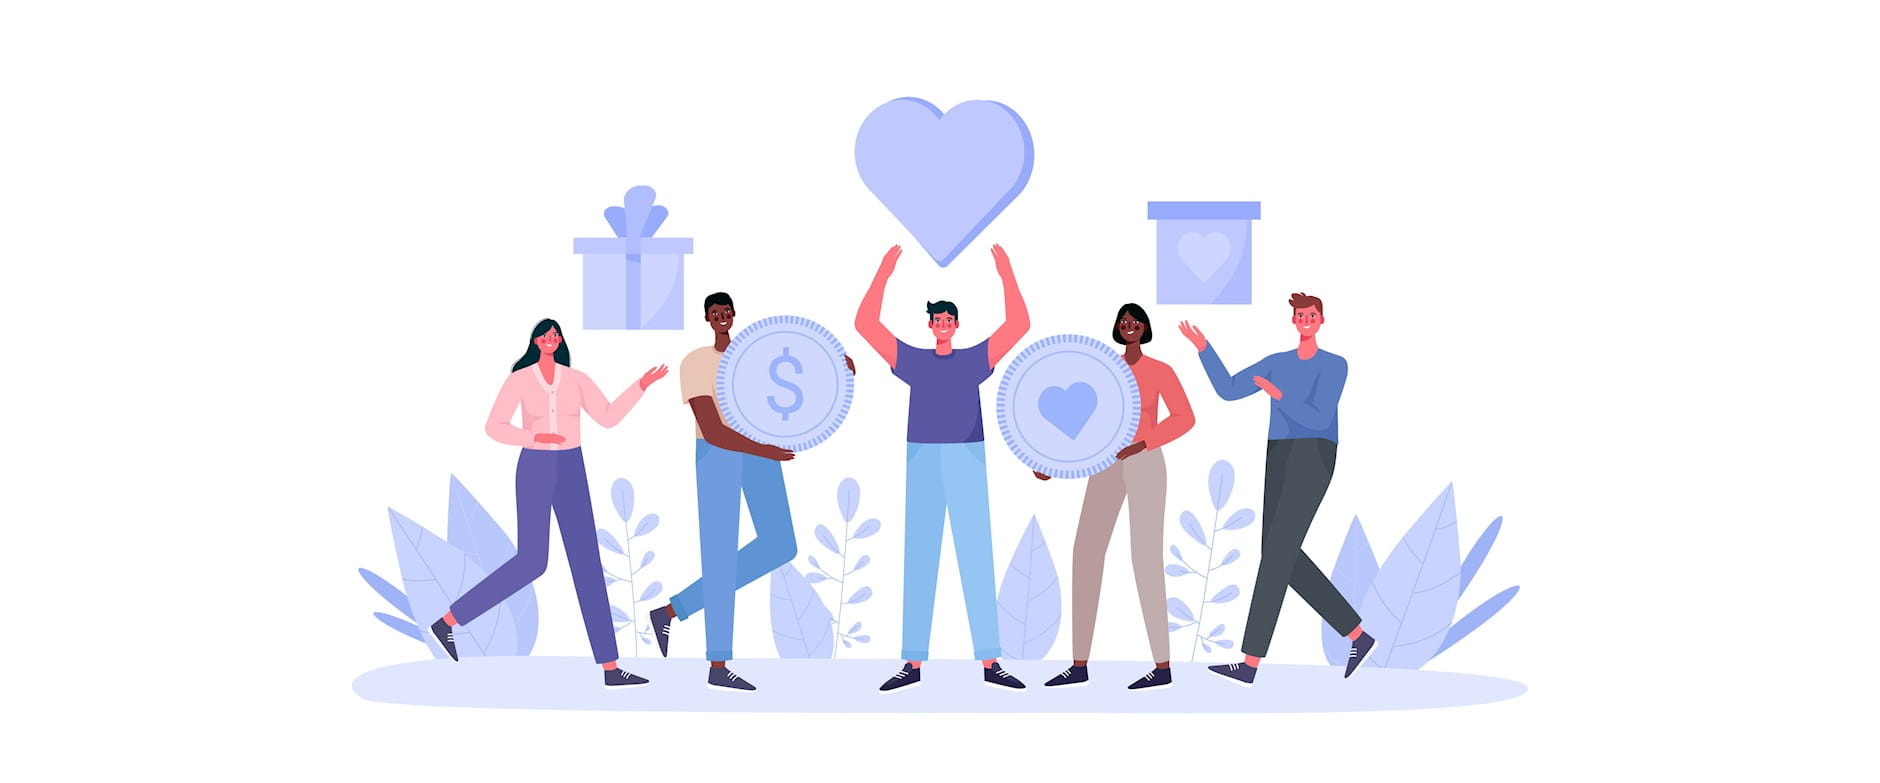 Colorful illustration of people holding boxes and coins to donate; the center man is holding a heart